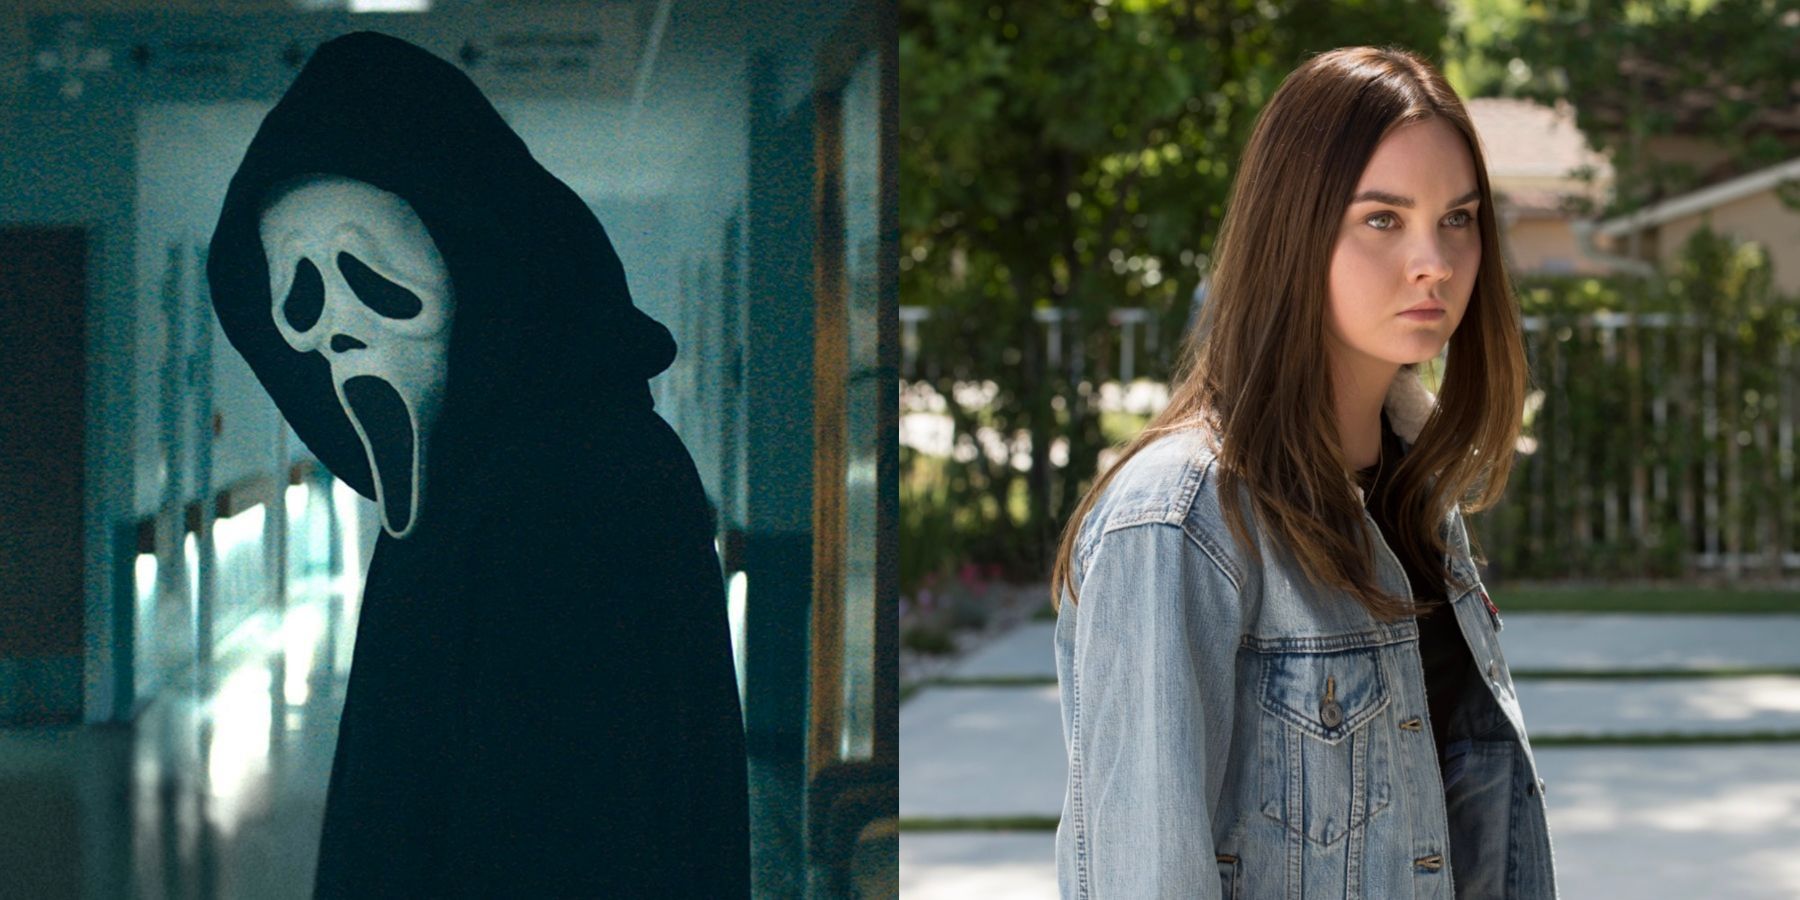 Scream 6 Adds More Cast Members, Will Reportedly Take Place In New